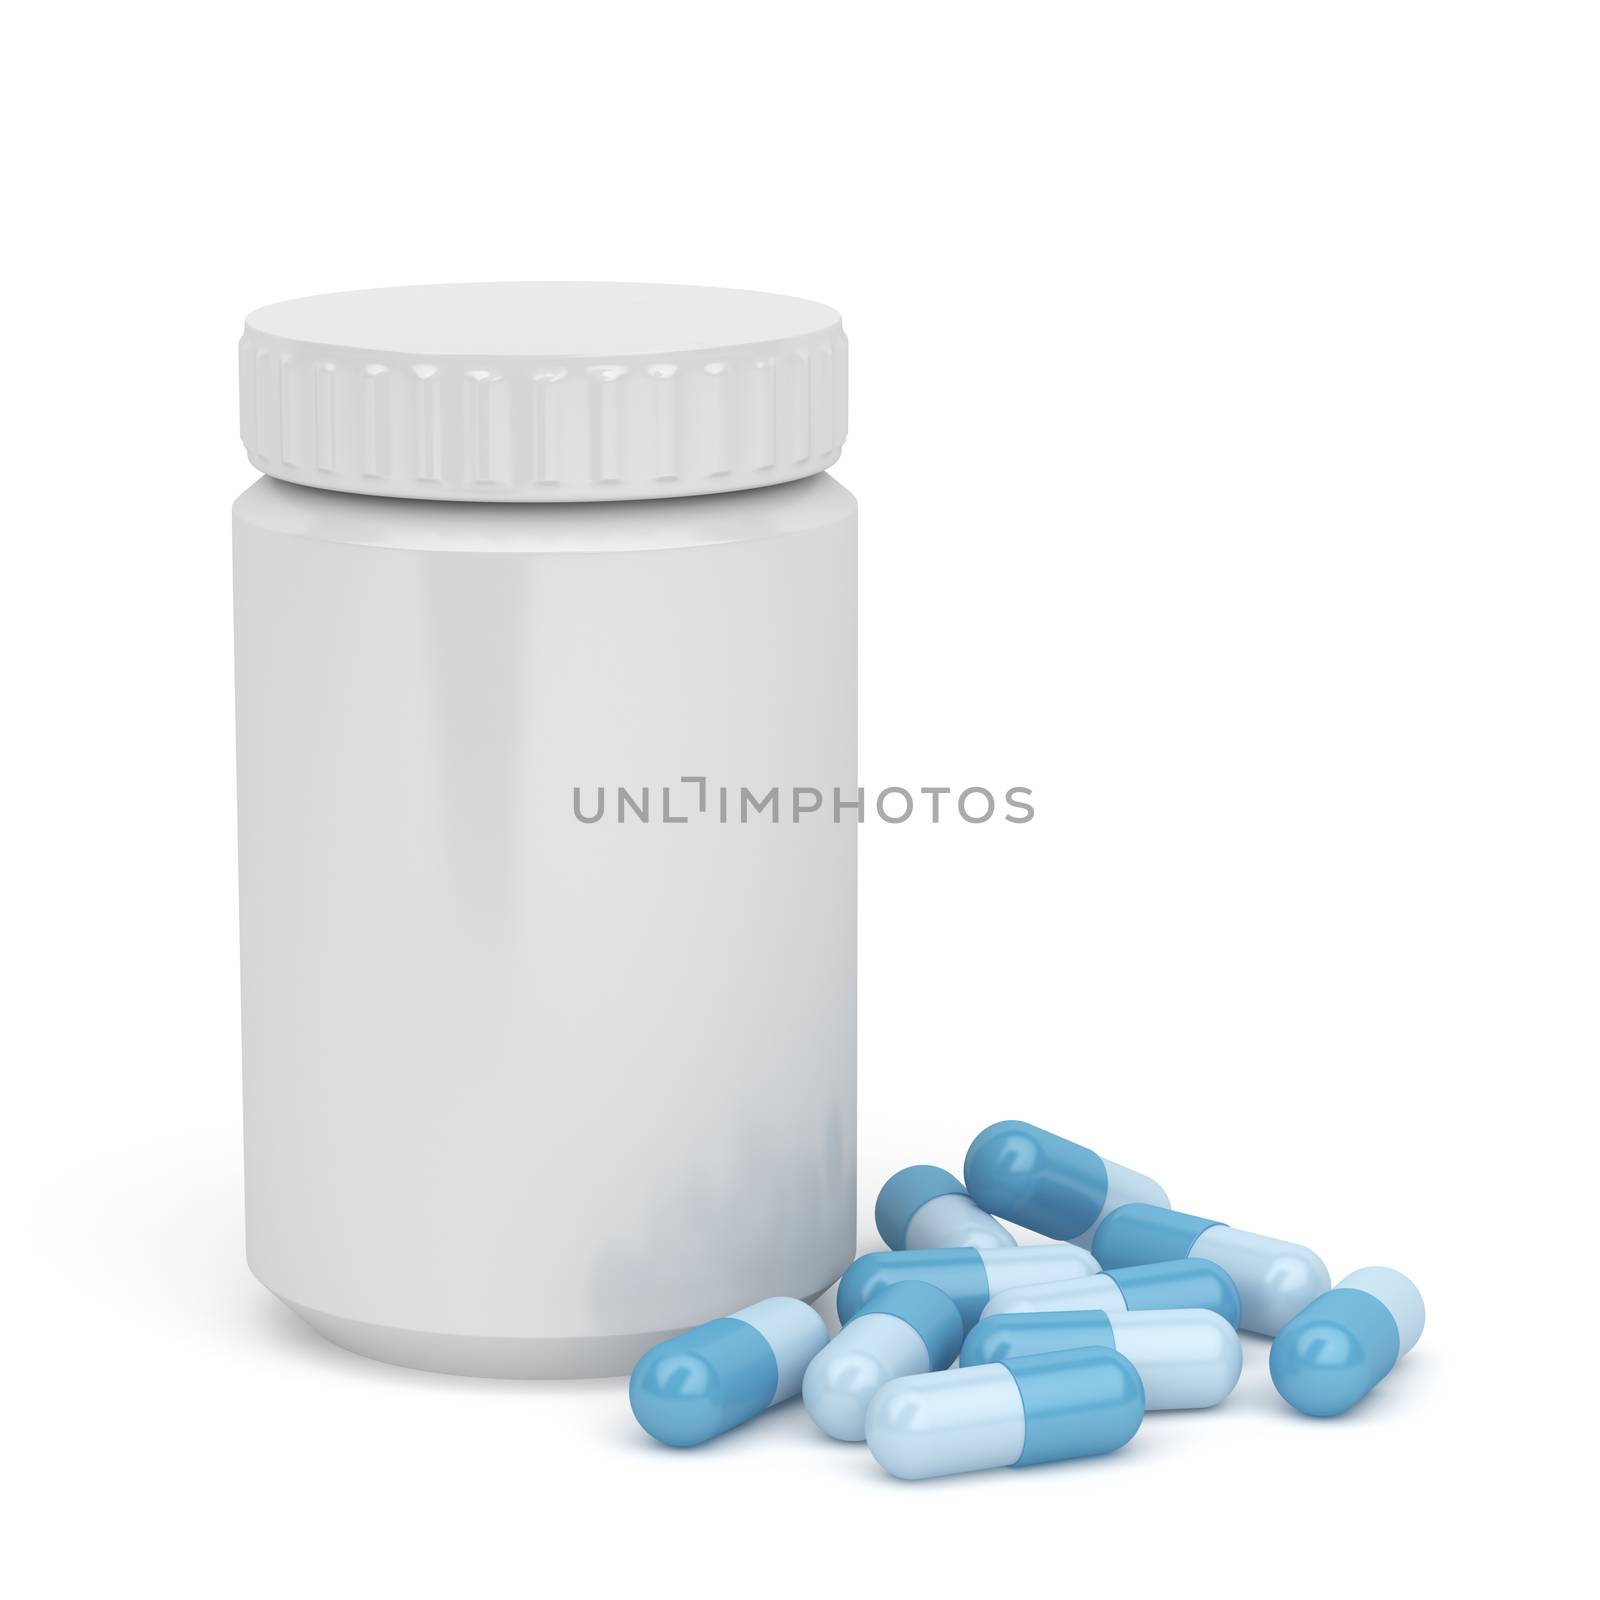 Capsules and plastic bottle by magraphics